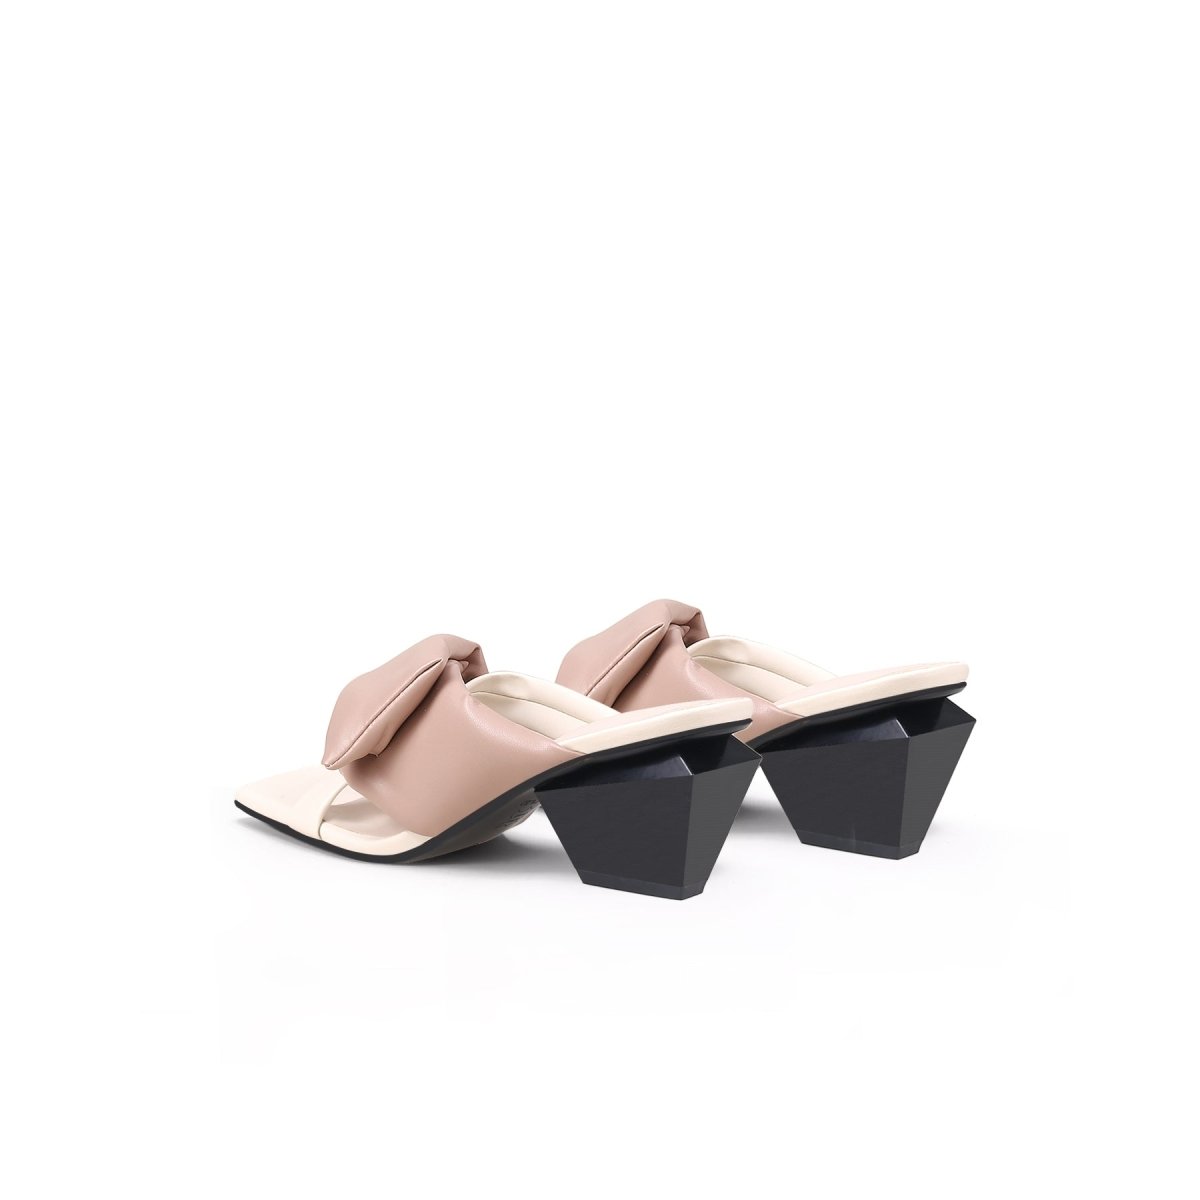 WRAP Padded Apricot Mules - 0cm